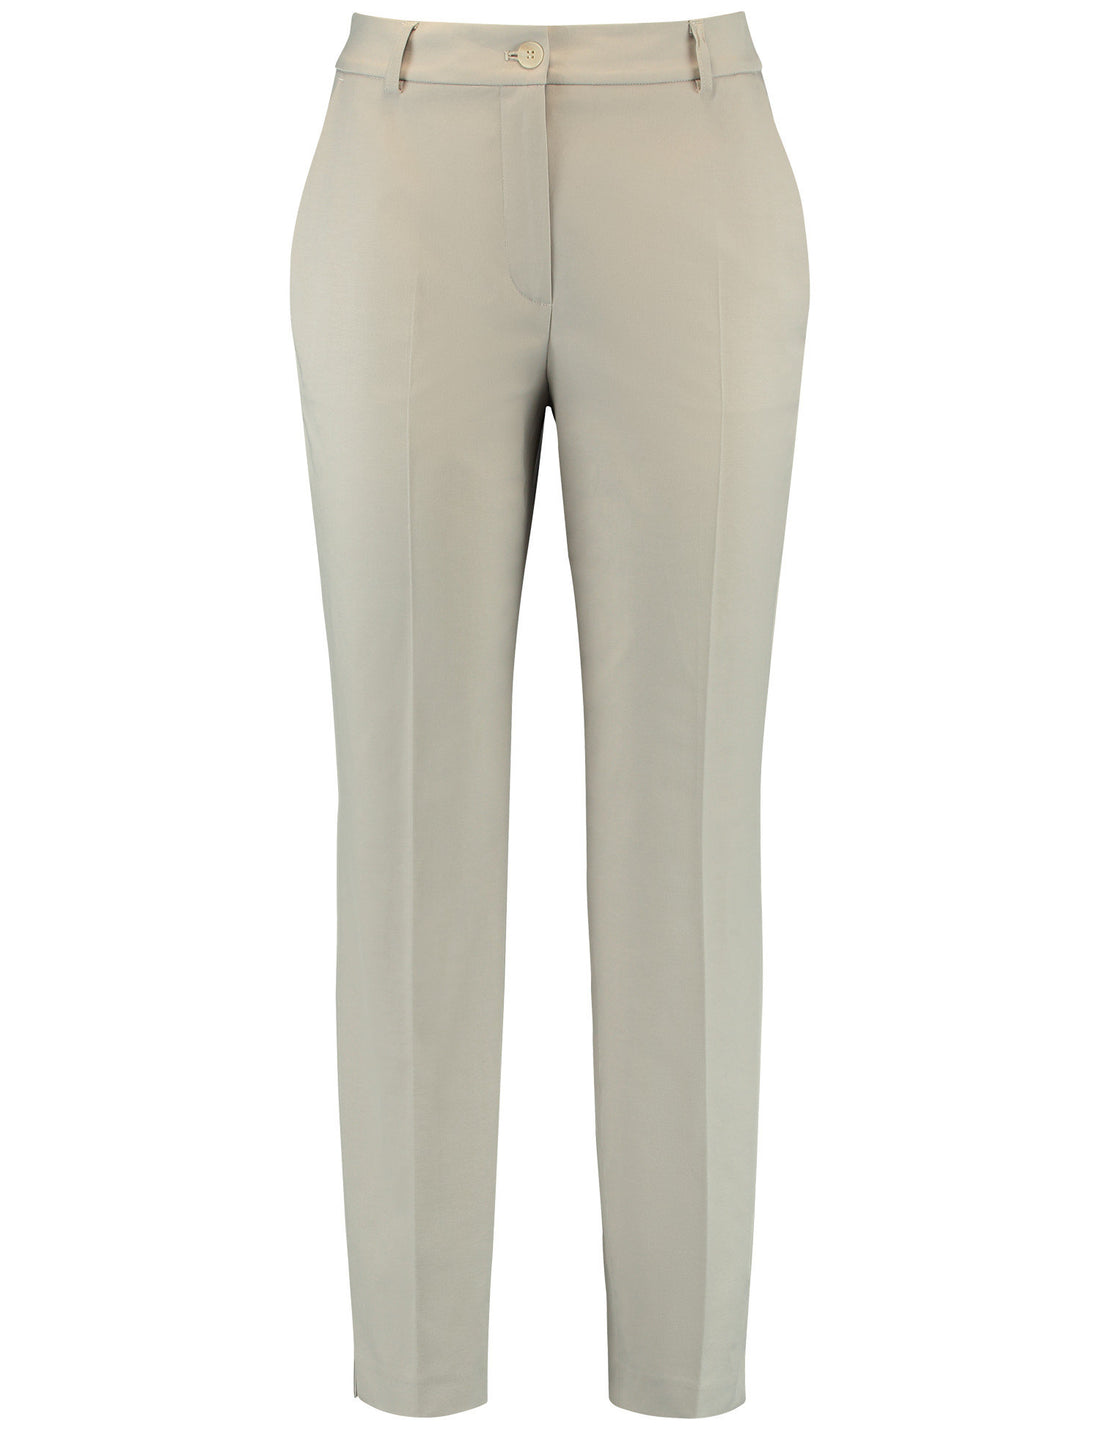 Straight Elegant Trousers With Pressed Pleats_320003-31332_90031_01